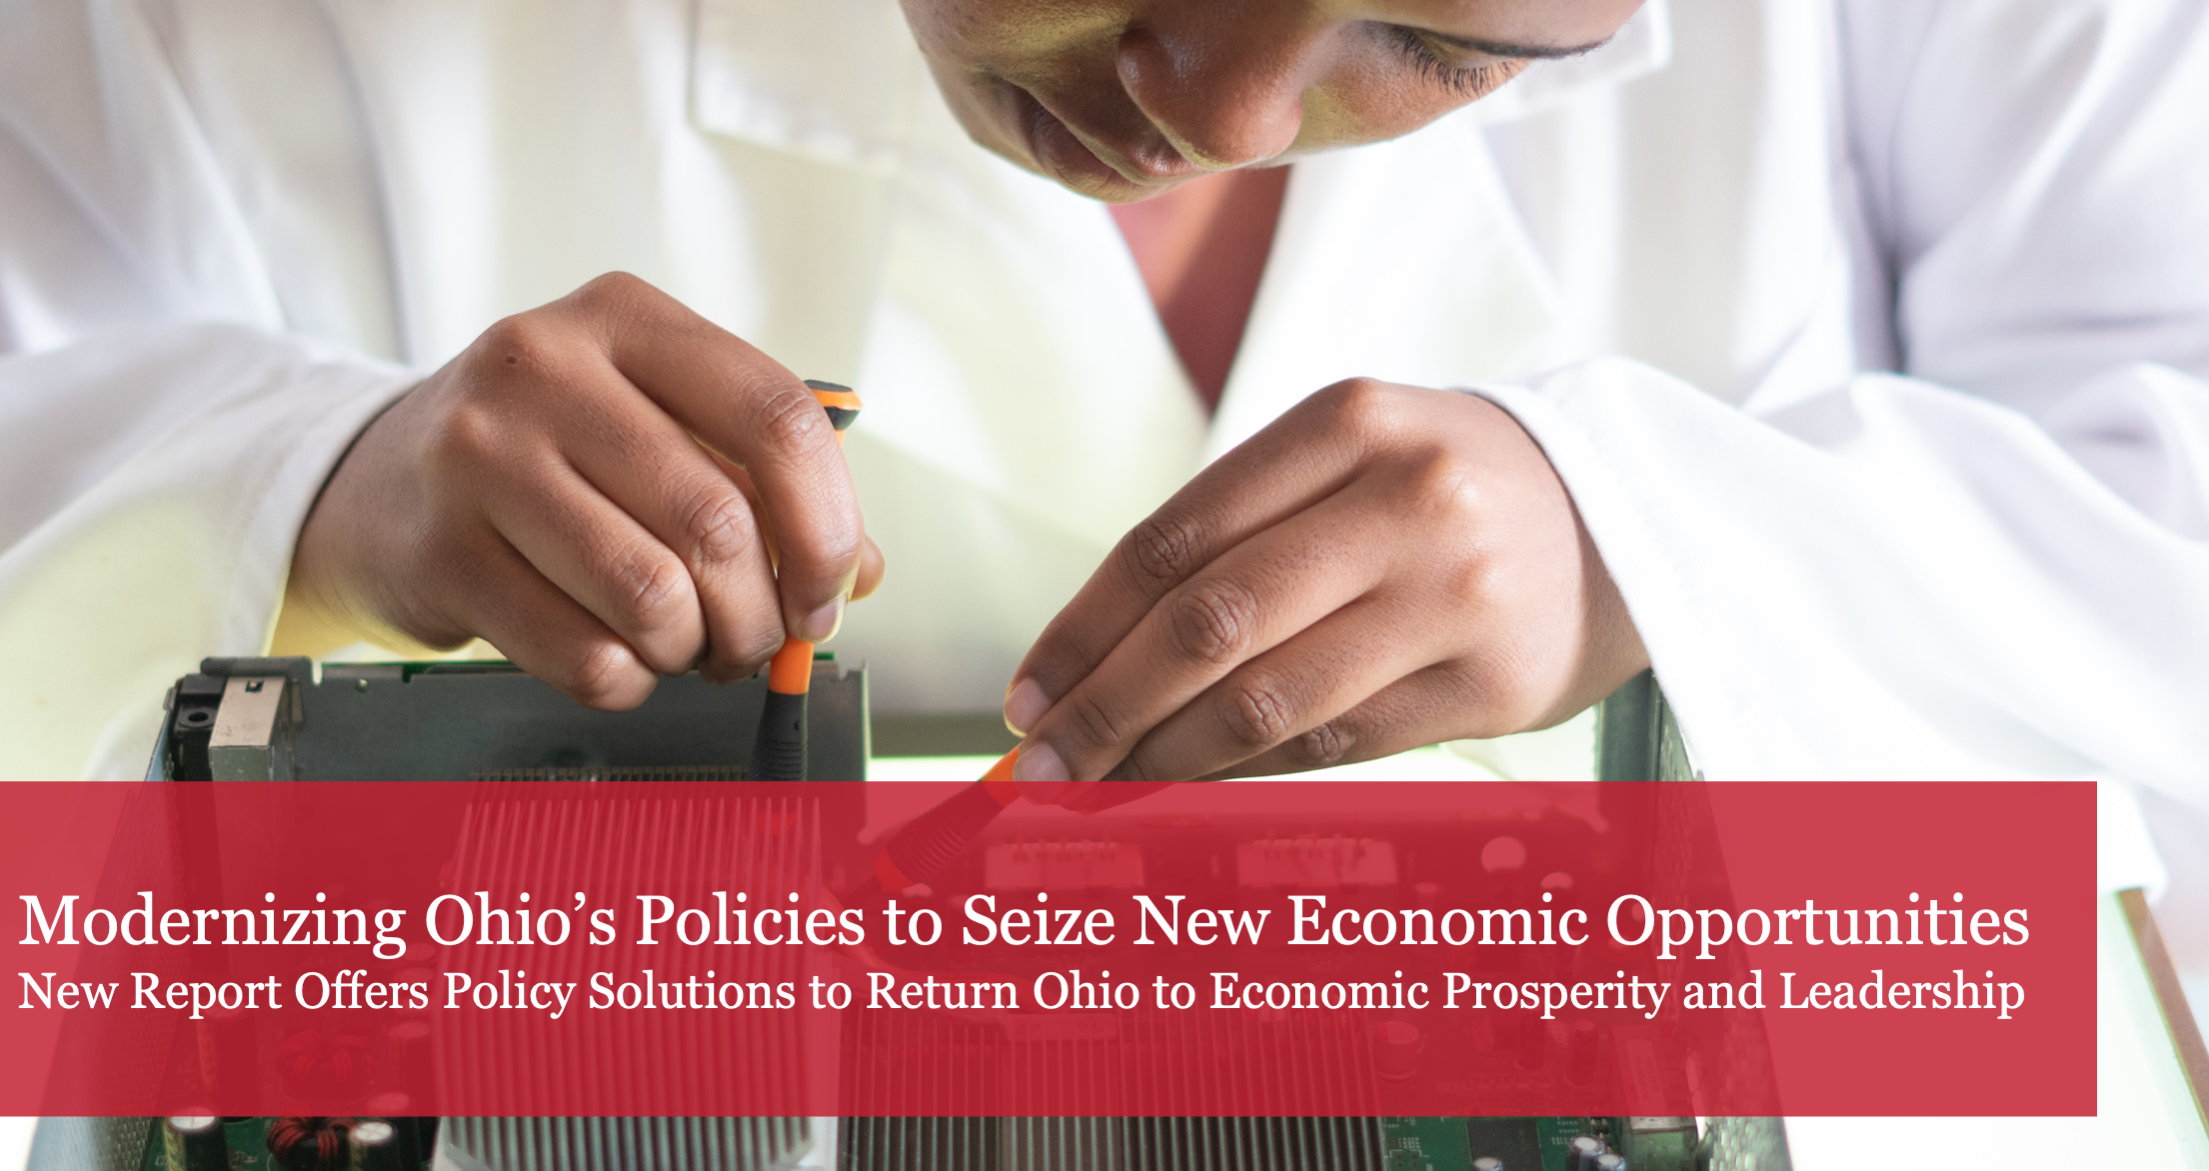 New Buckeye Institute Report Outlines How Ohio Can Modernize its Economy to Seize New Economic Opportunities